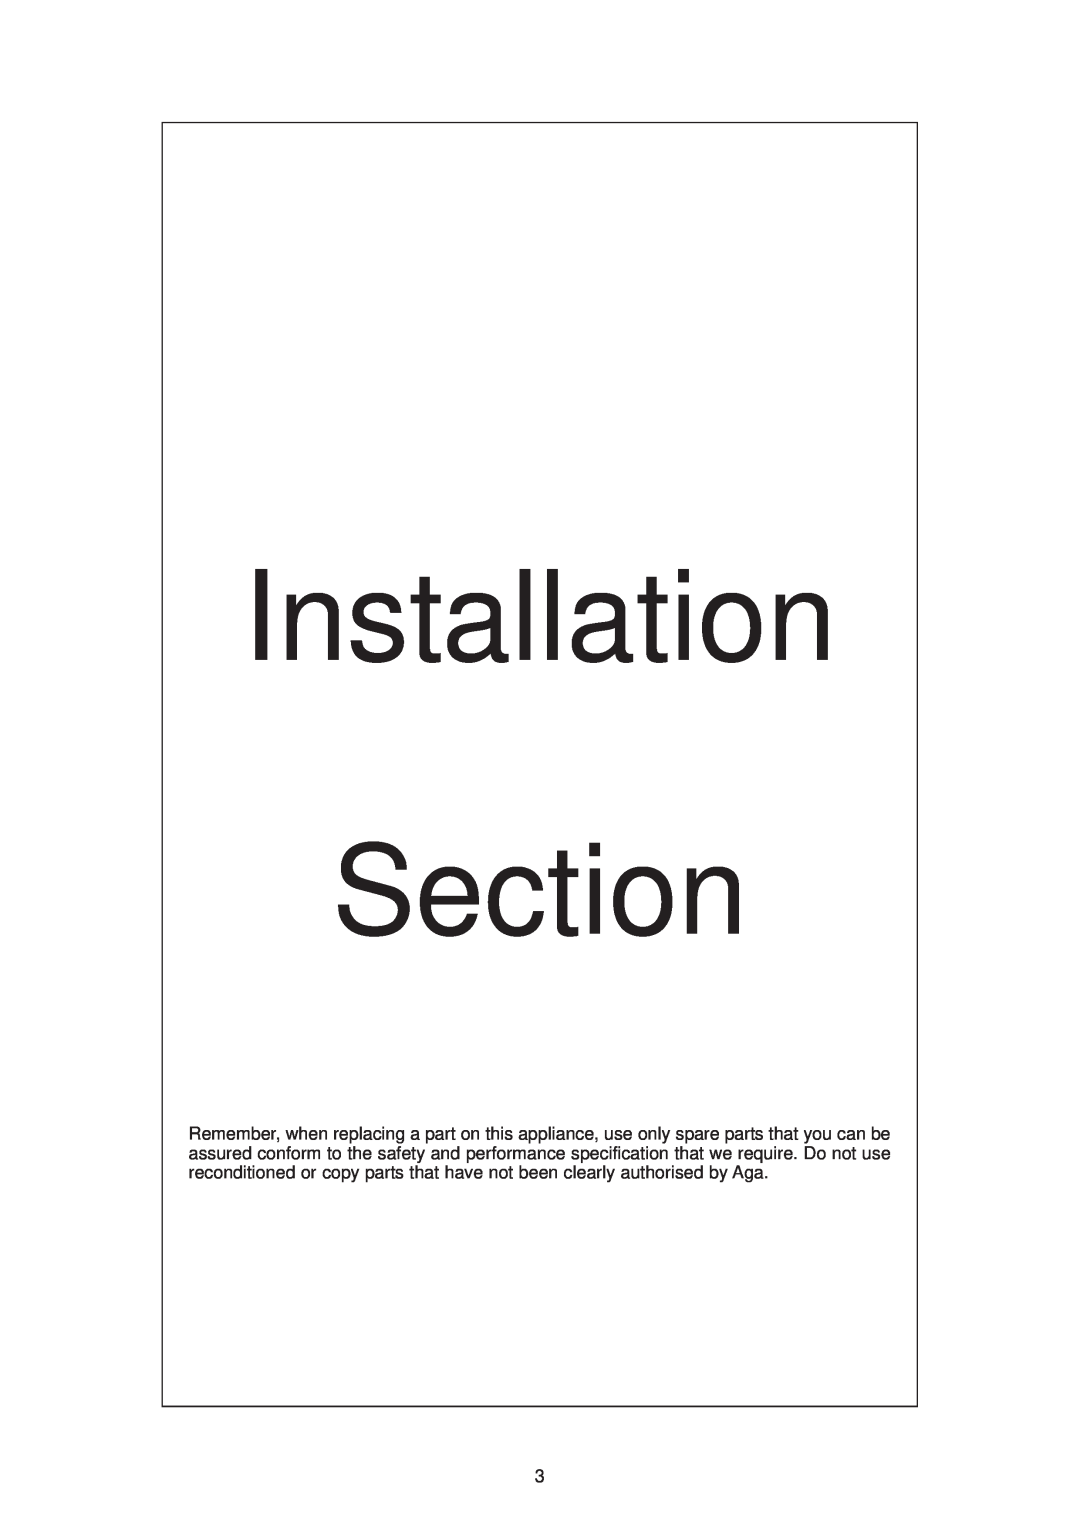 Aga Ranges DESN 512387 A owner manual Installation Section 